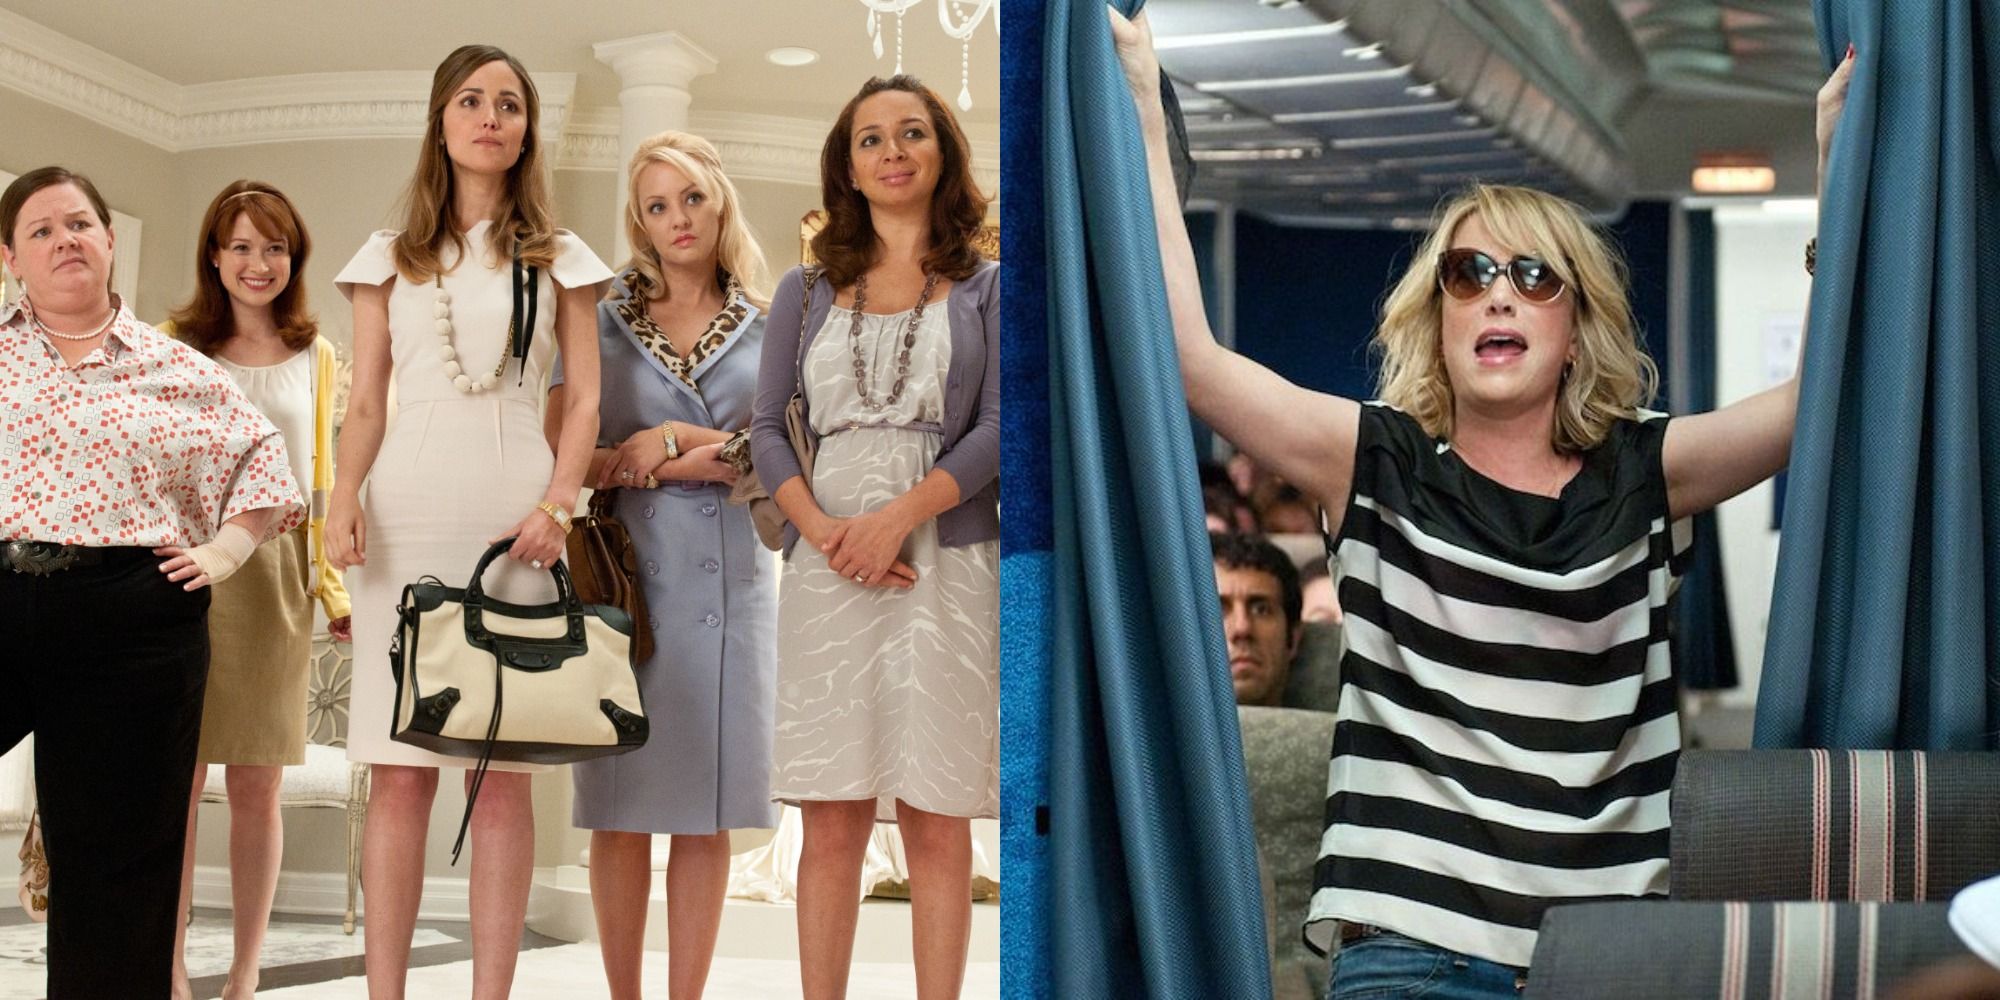 Bridesmaids 10th Anniversary 10 Things You Didn’t Know About The Movie